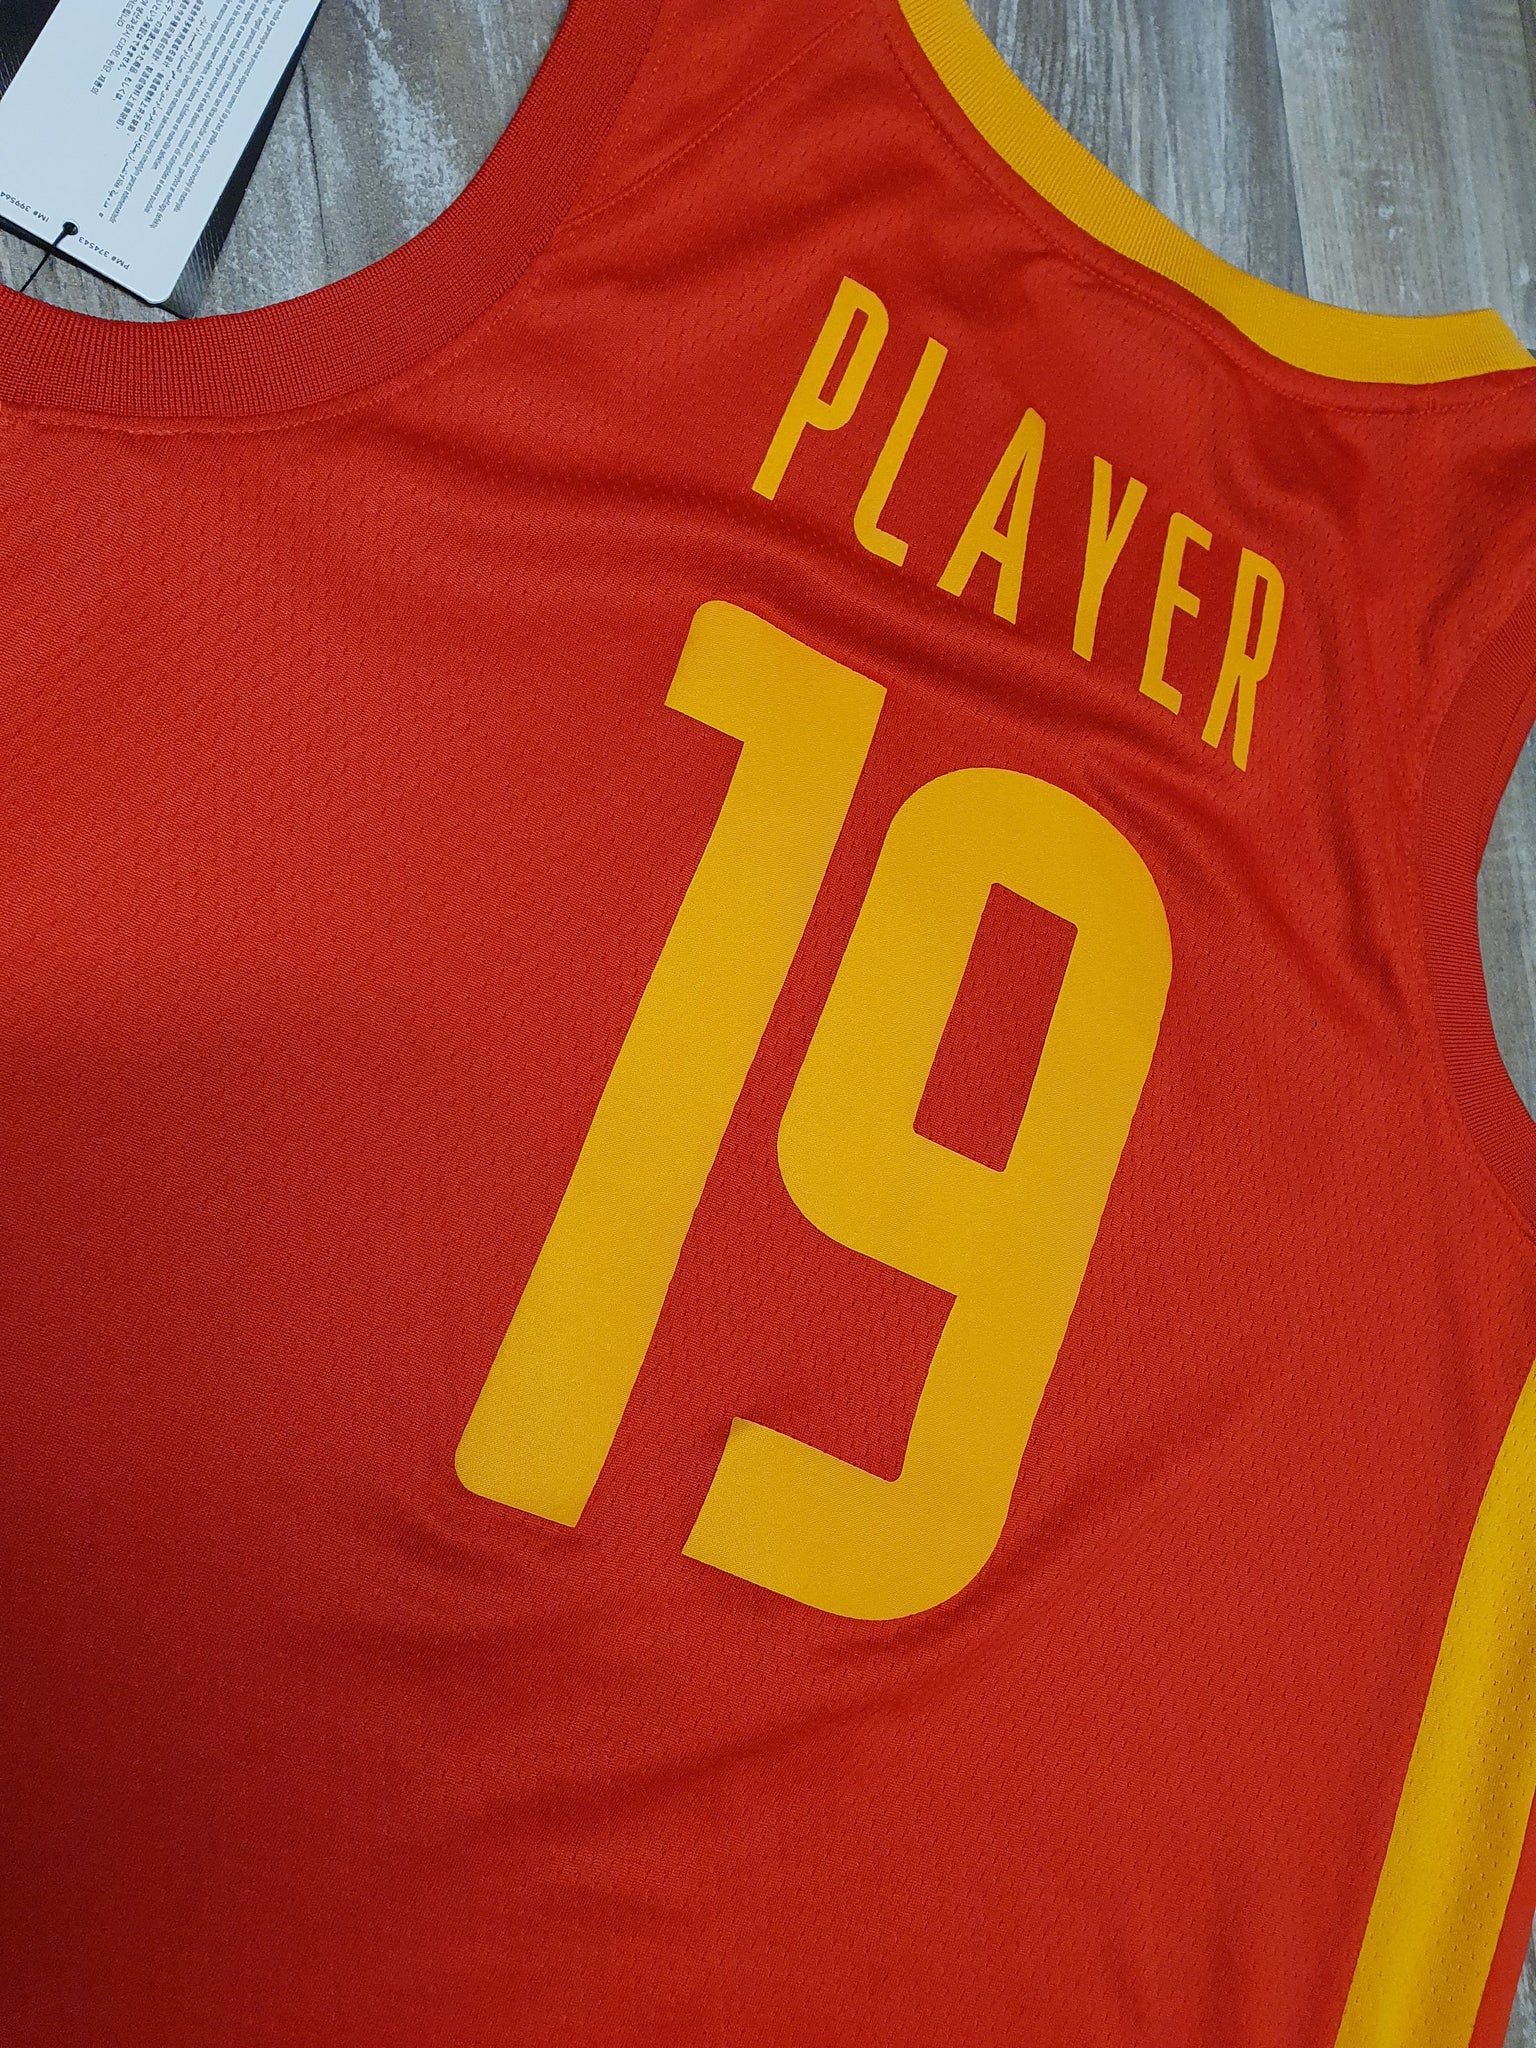 🏀 Spain Basketball Sample Jersey Size Medium – The Throwback Store 🏀